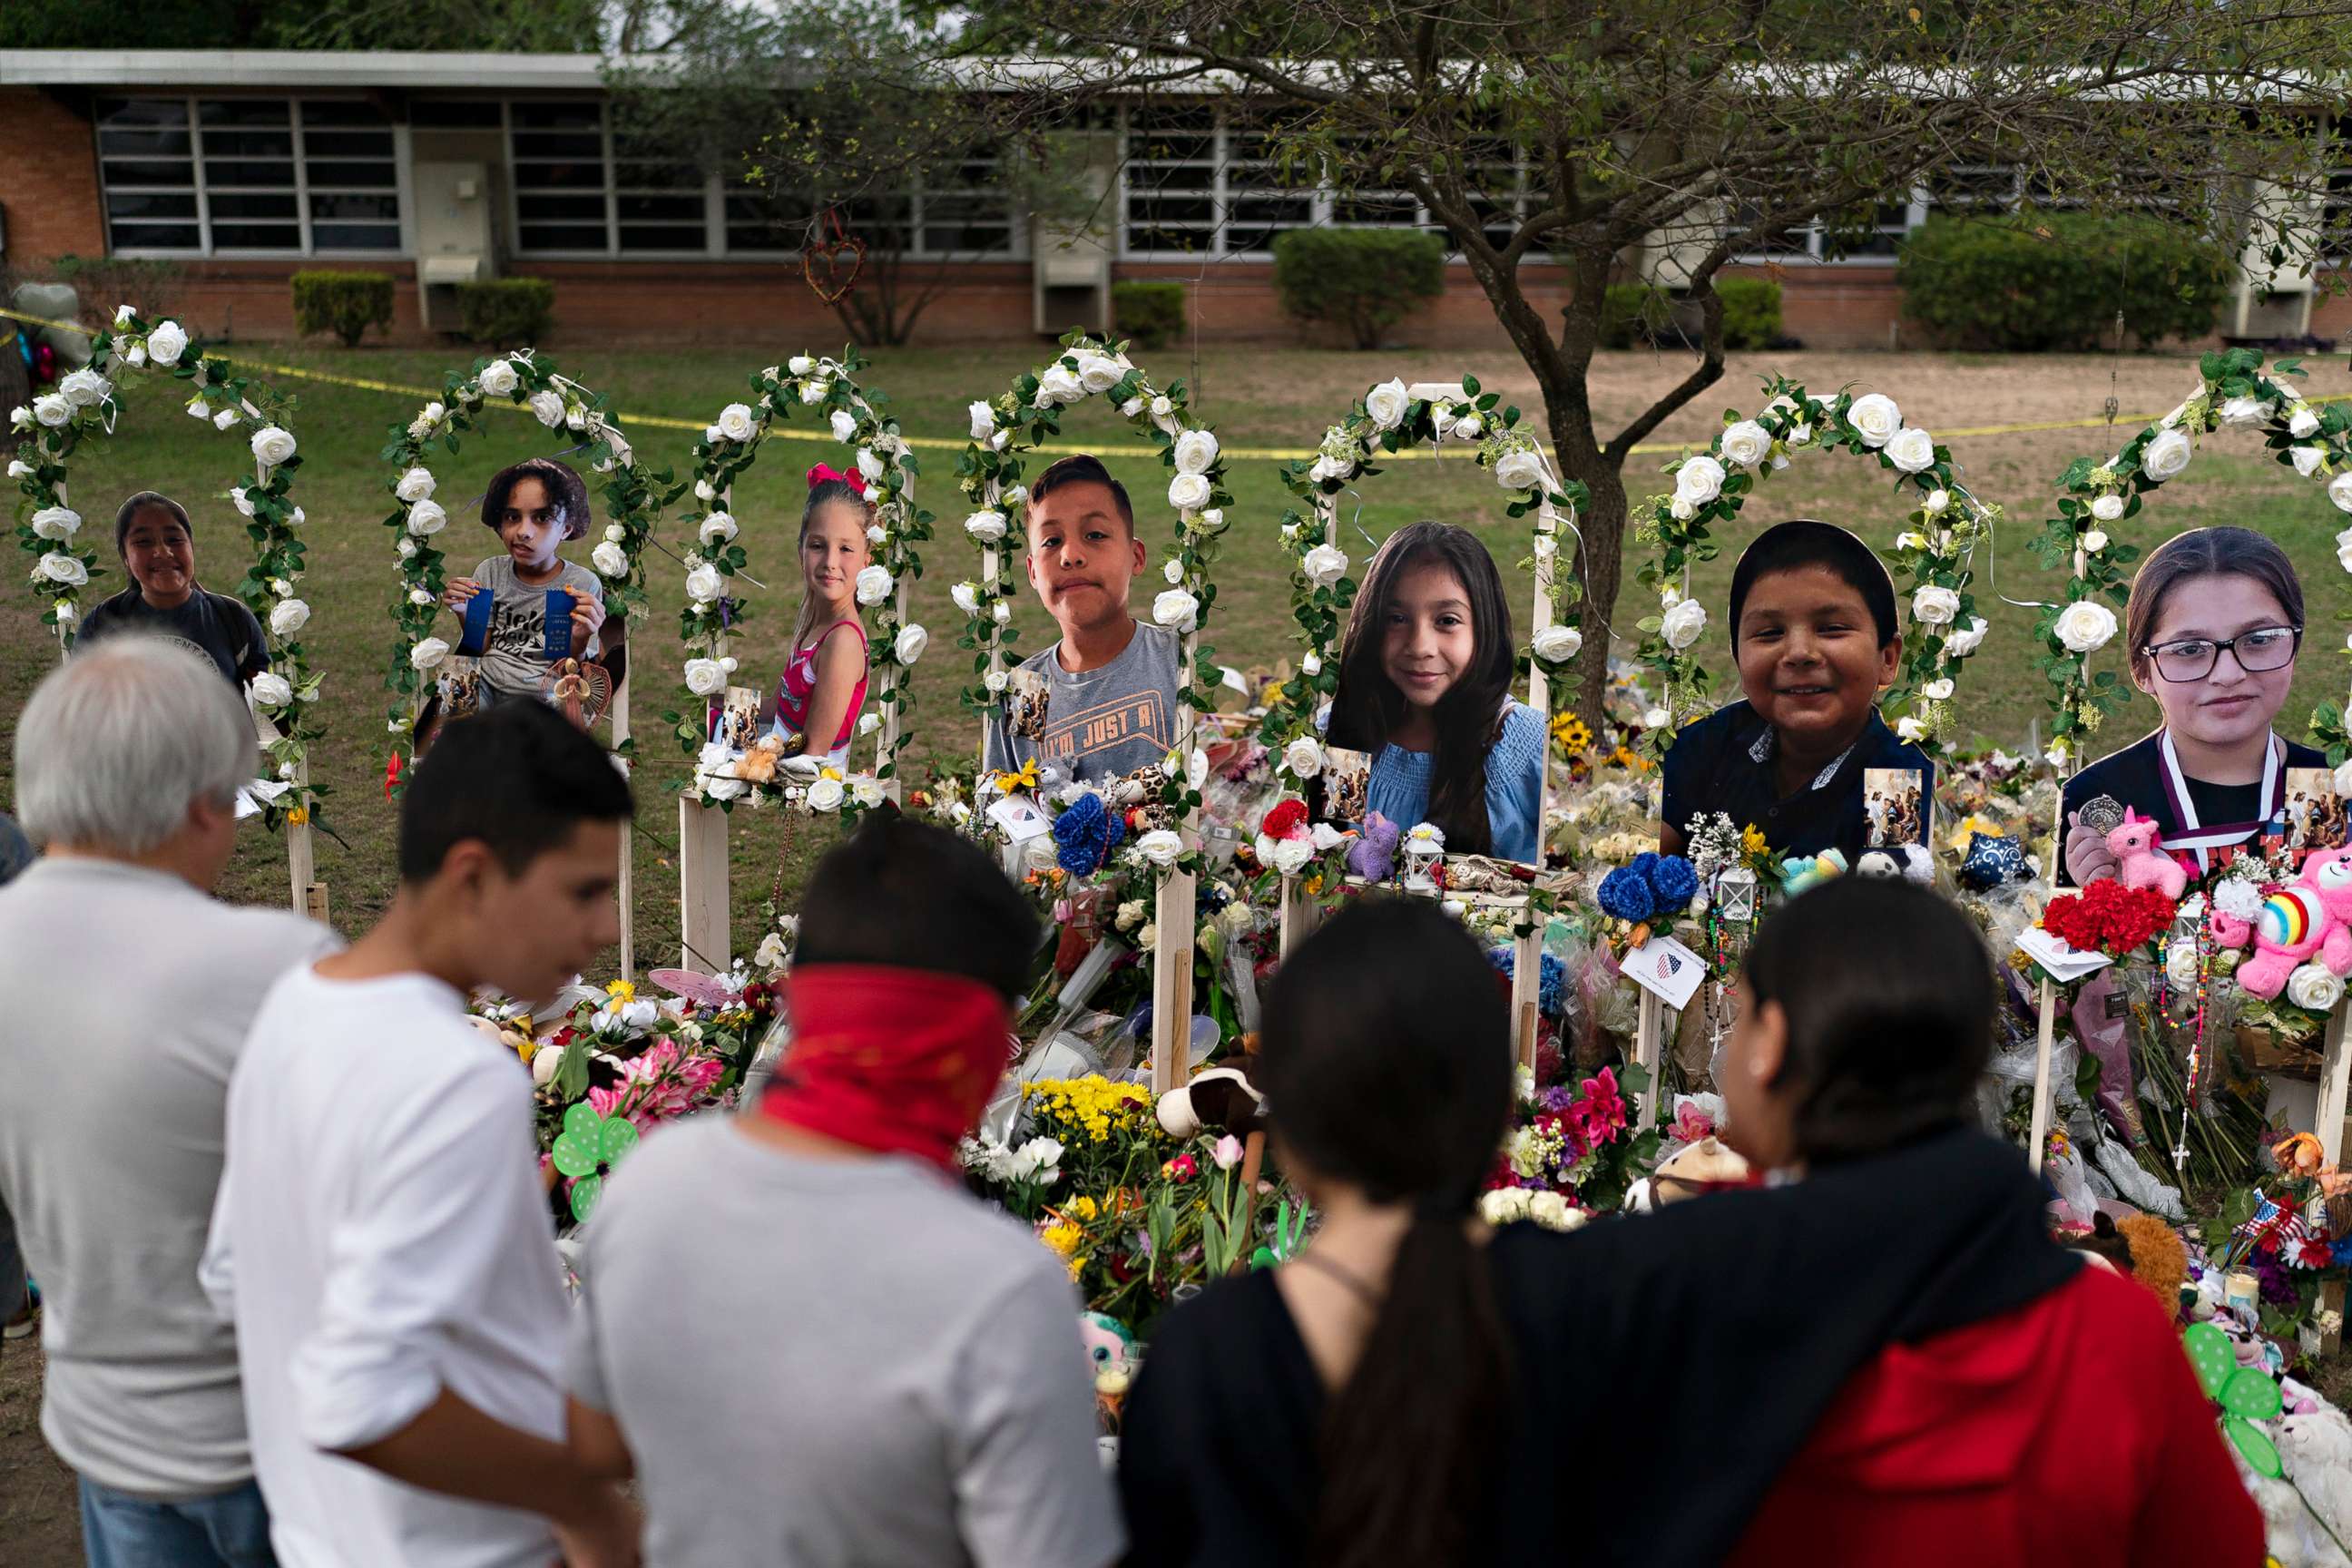 PHOTO: People gather at a memorial at Robb Elementary School in Uvalde, May 30, 2022, to pay their respects to the victims killed in last week's school shooting.